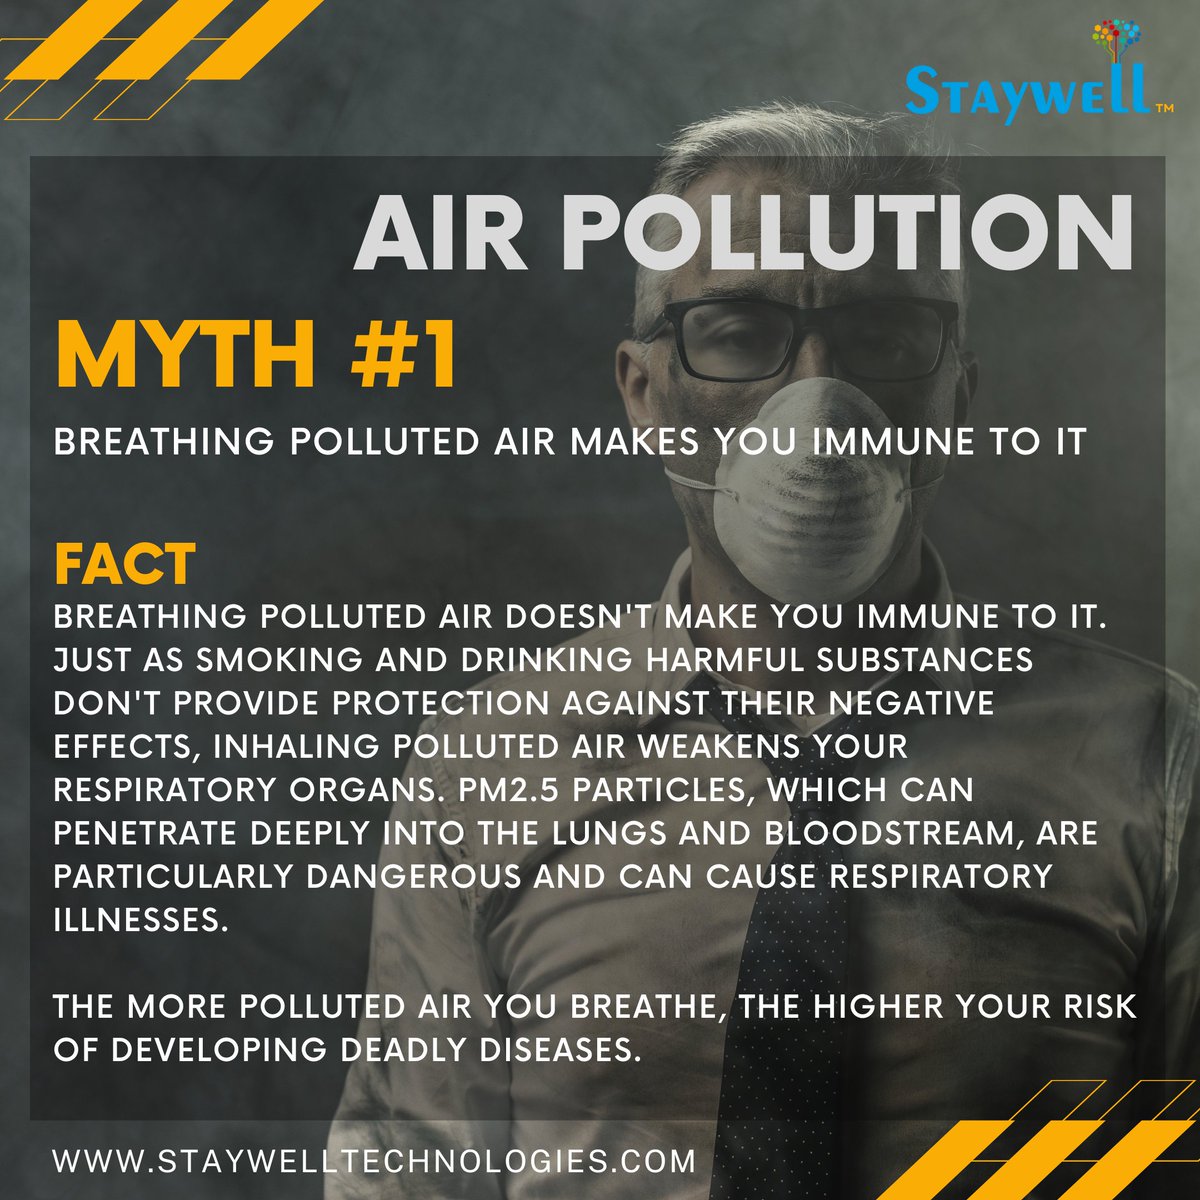 #AirPollutionMisconception #BreathingPollutedAir #PM25Particles #RespiratoryIllness #DeadlyDiseases #HealthAwareness #Myth #AirPollution #StaywellTechnologies #Staywell
staywell.live
#AirYouCanWear